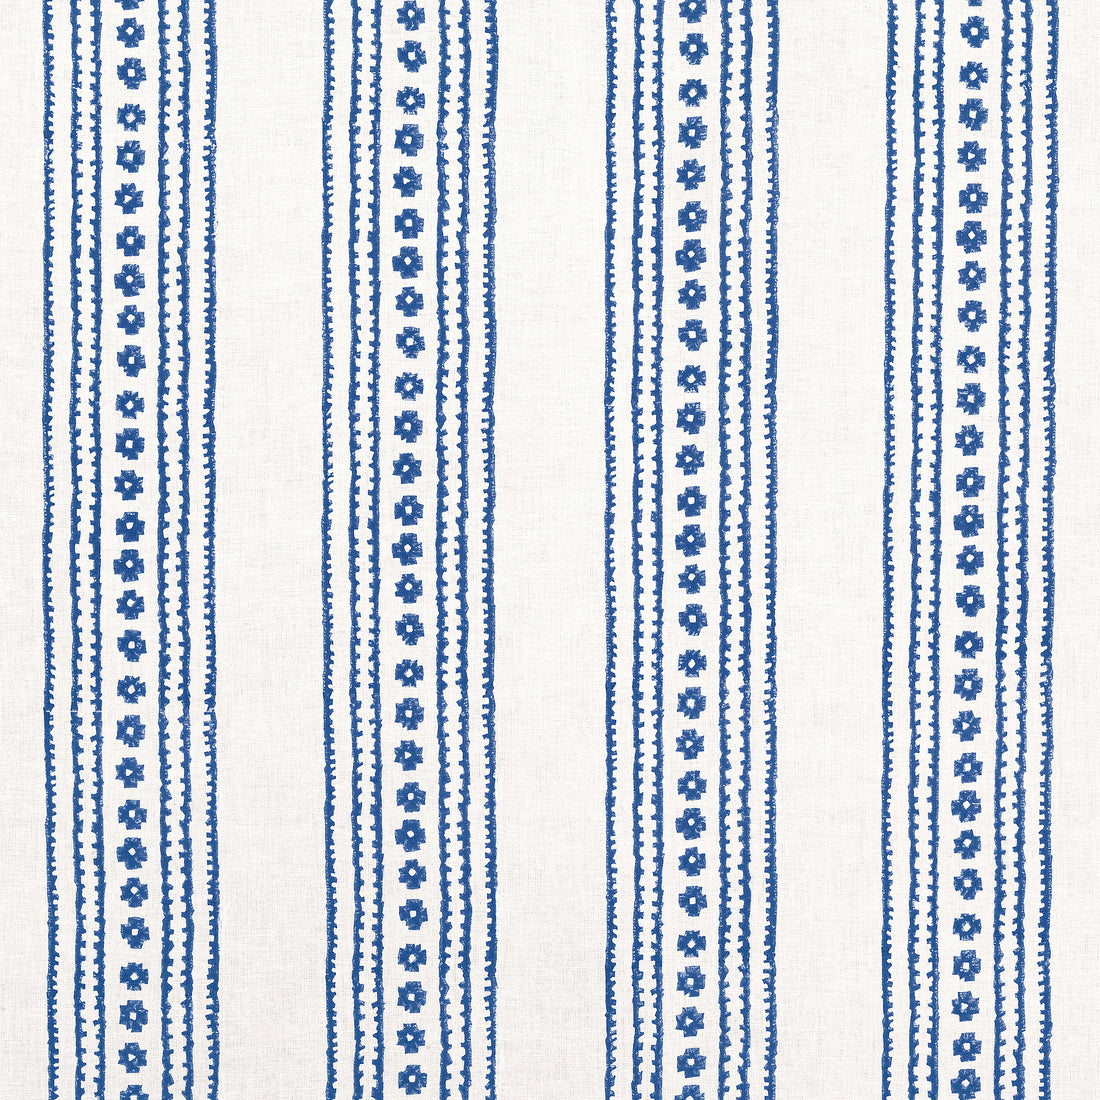 New Haven Stripe fabric in navy color - pattern number F910608 - by Thibaut in the Ceylon collection